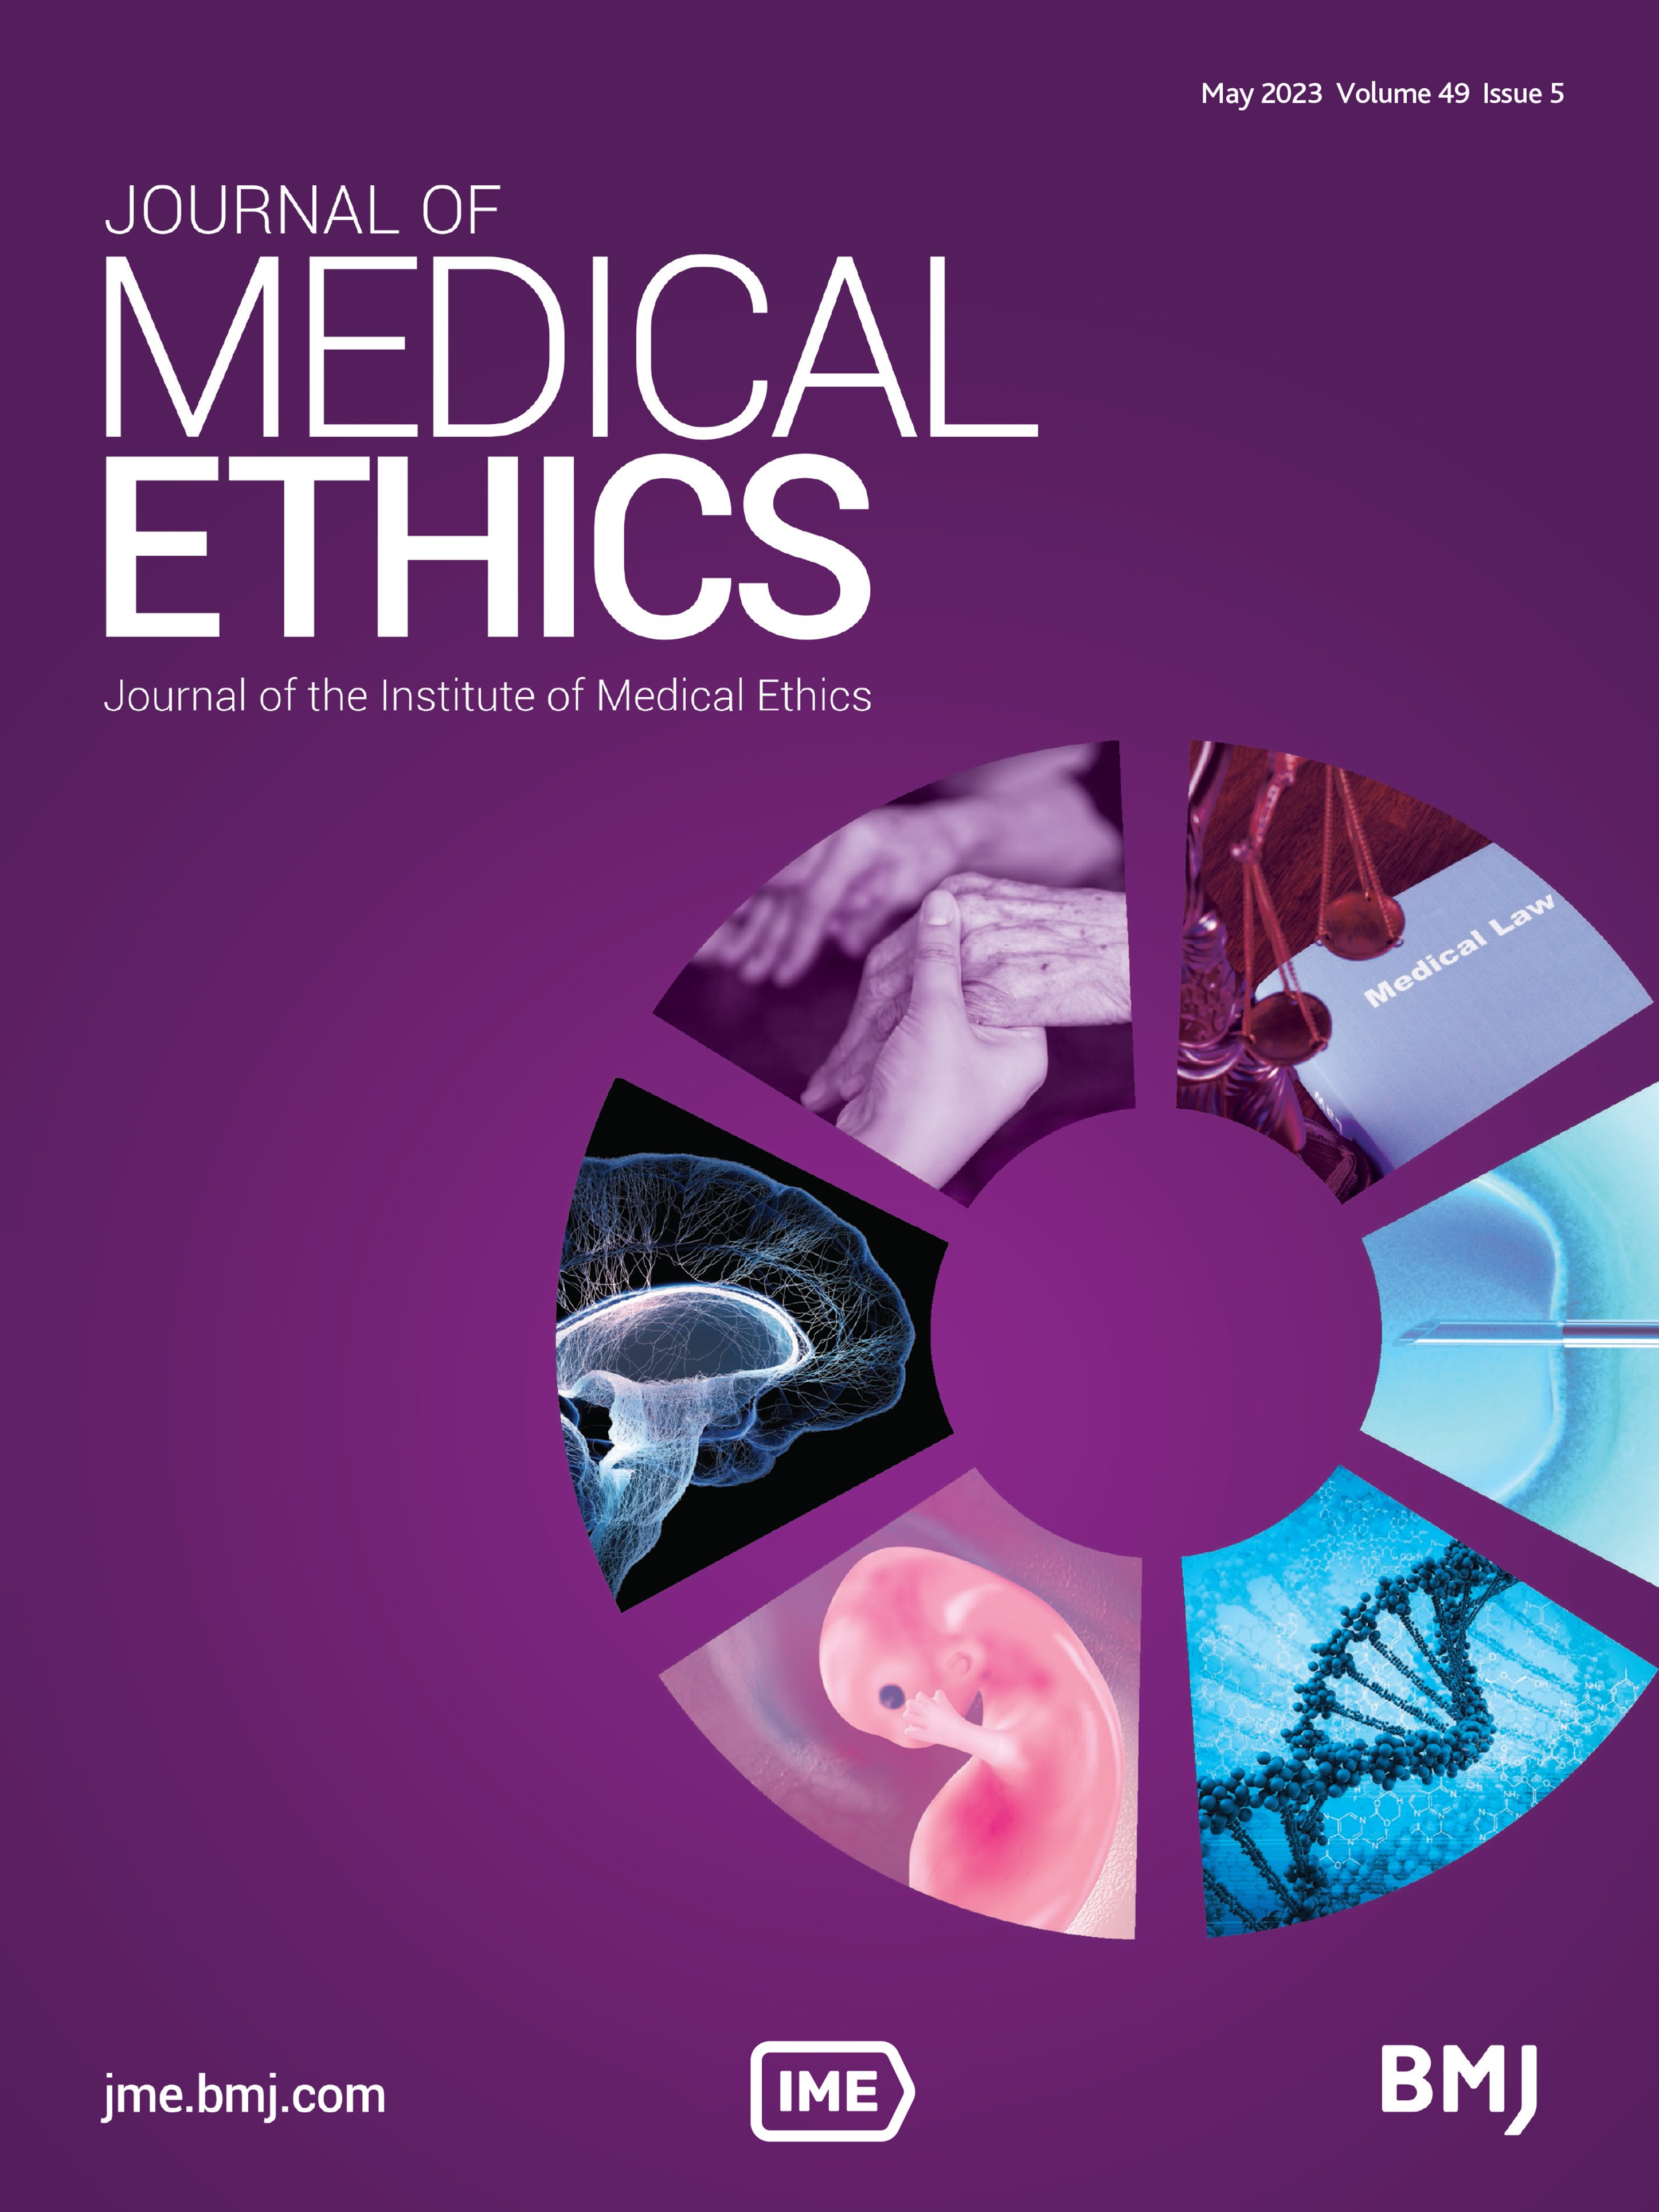 Beyond regulatory approaches to ethics: making space for ethical preparedness in healthcare research